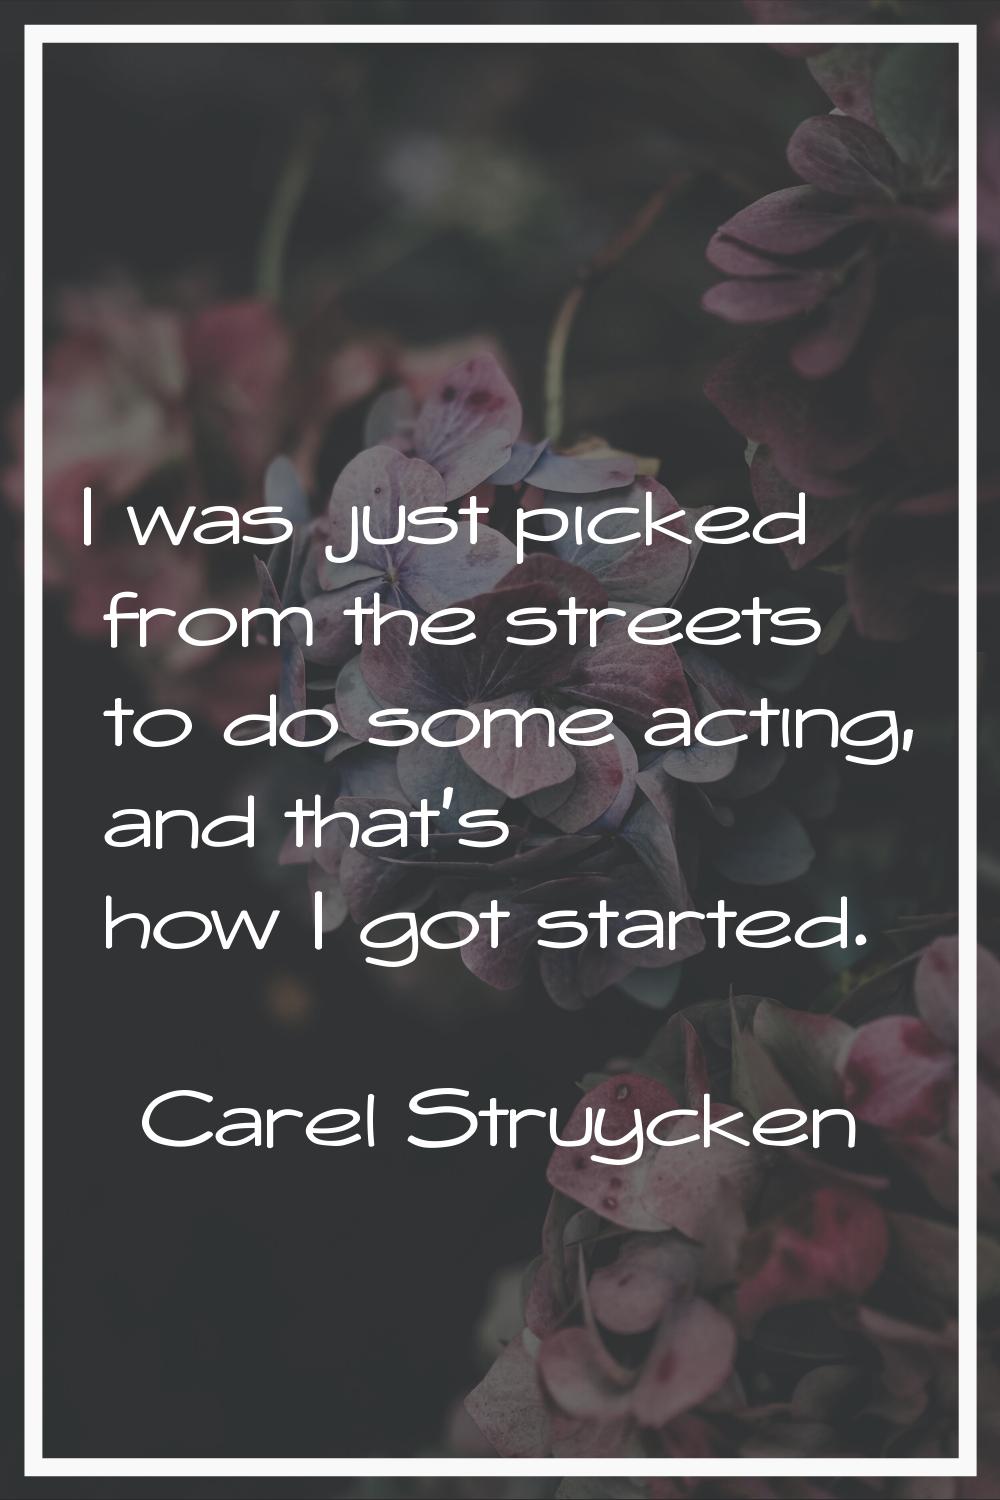 I was just picked from the streets to do some acting, and that's how I got started.